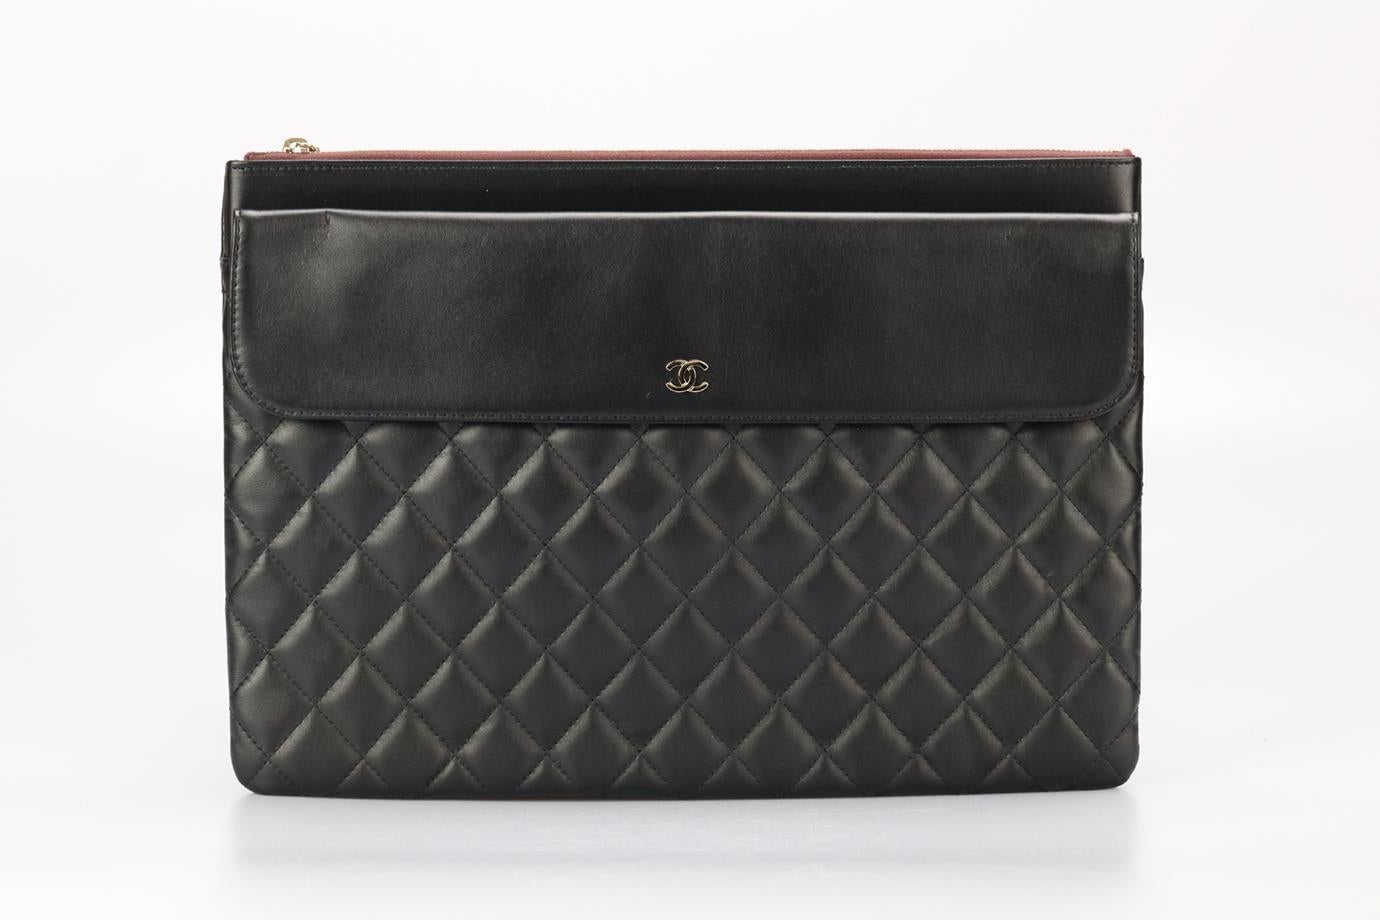 Chanel 2017 Flp O-case Large Quilted Leather Clutch. Black. Zip fastening - Top. Comes with - authenticity card. Does not come with - dustbag or box. Height: 9.5 in. Width: 13.5 in. Depth: 0.6 in. Condition: Used. Very good condition - Few light